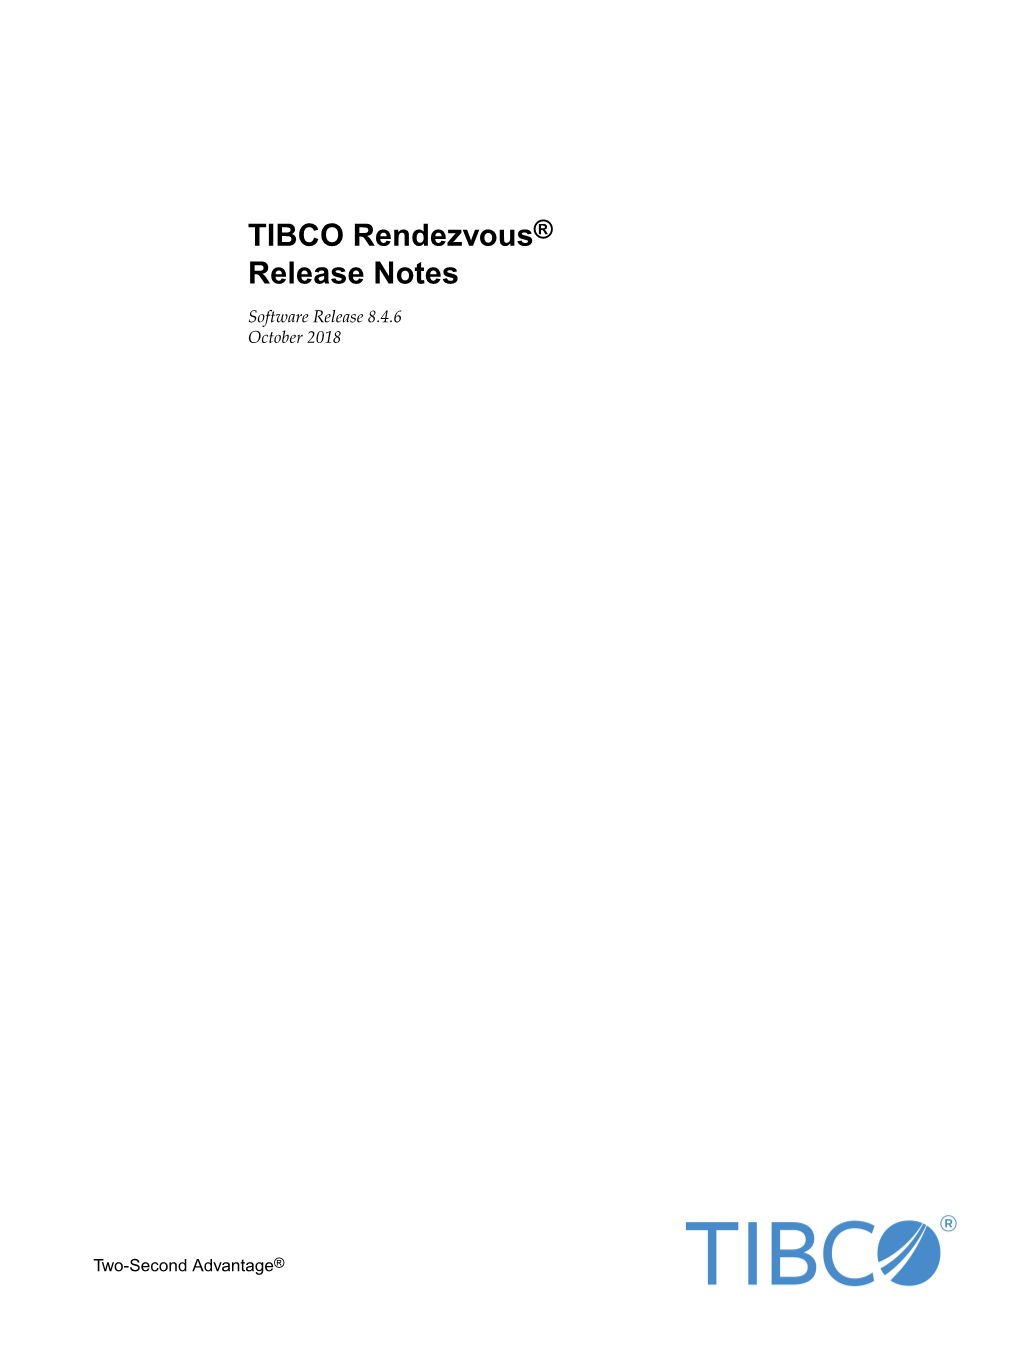 TIBCO Rendezvous® Release Notes